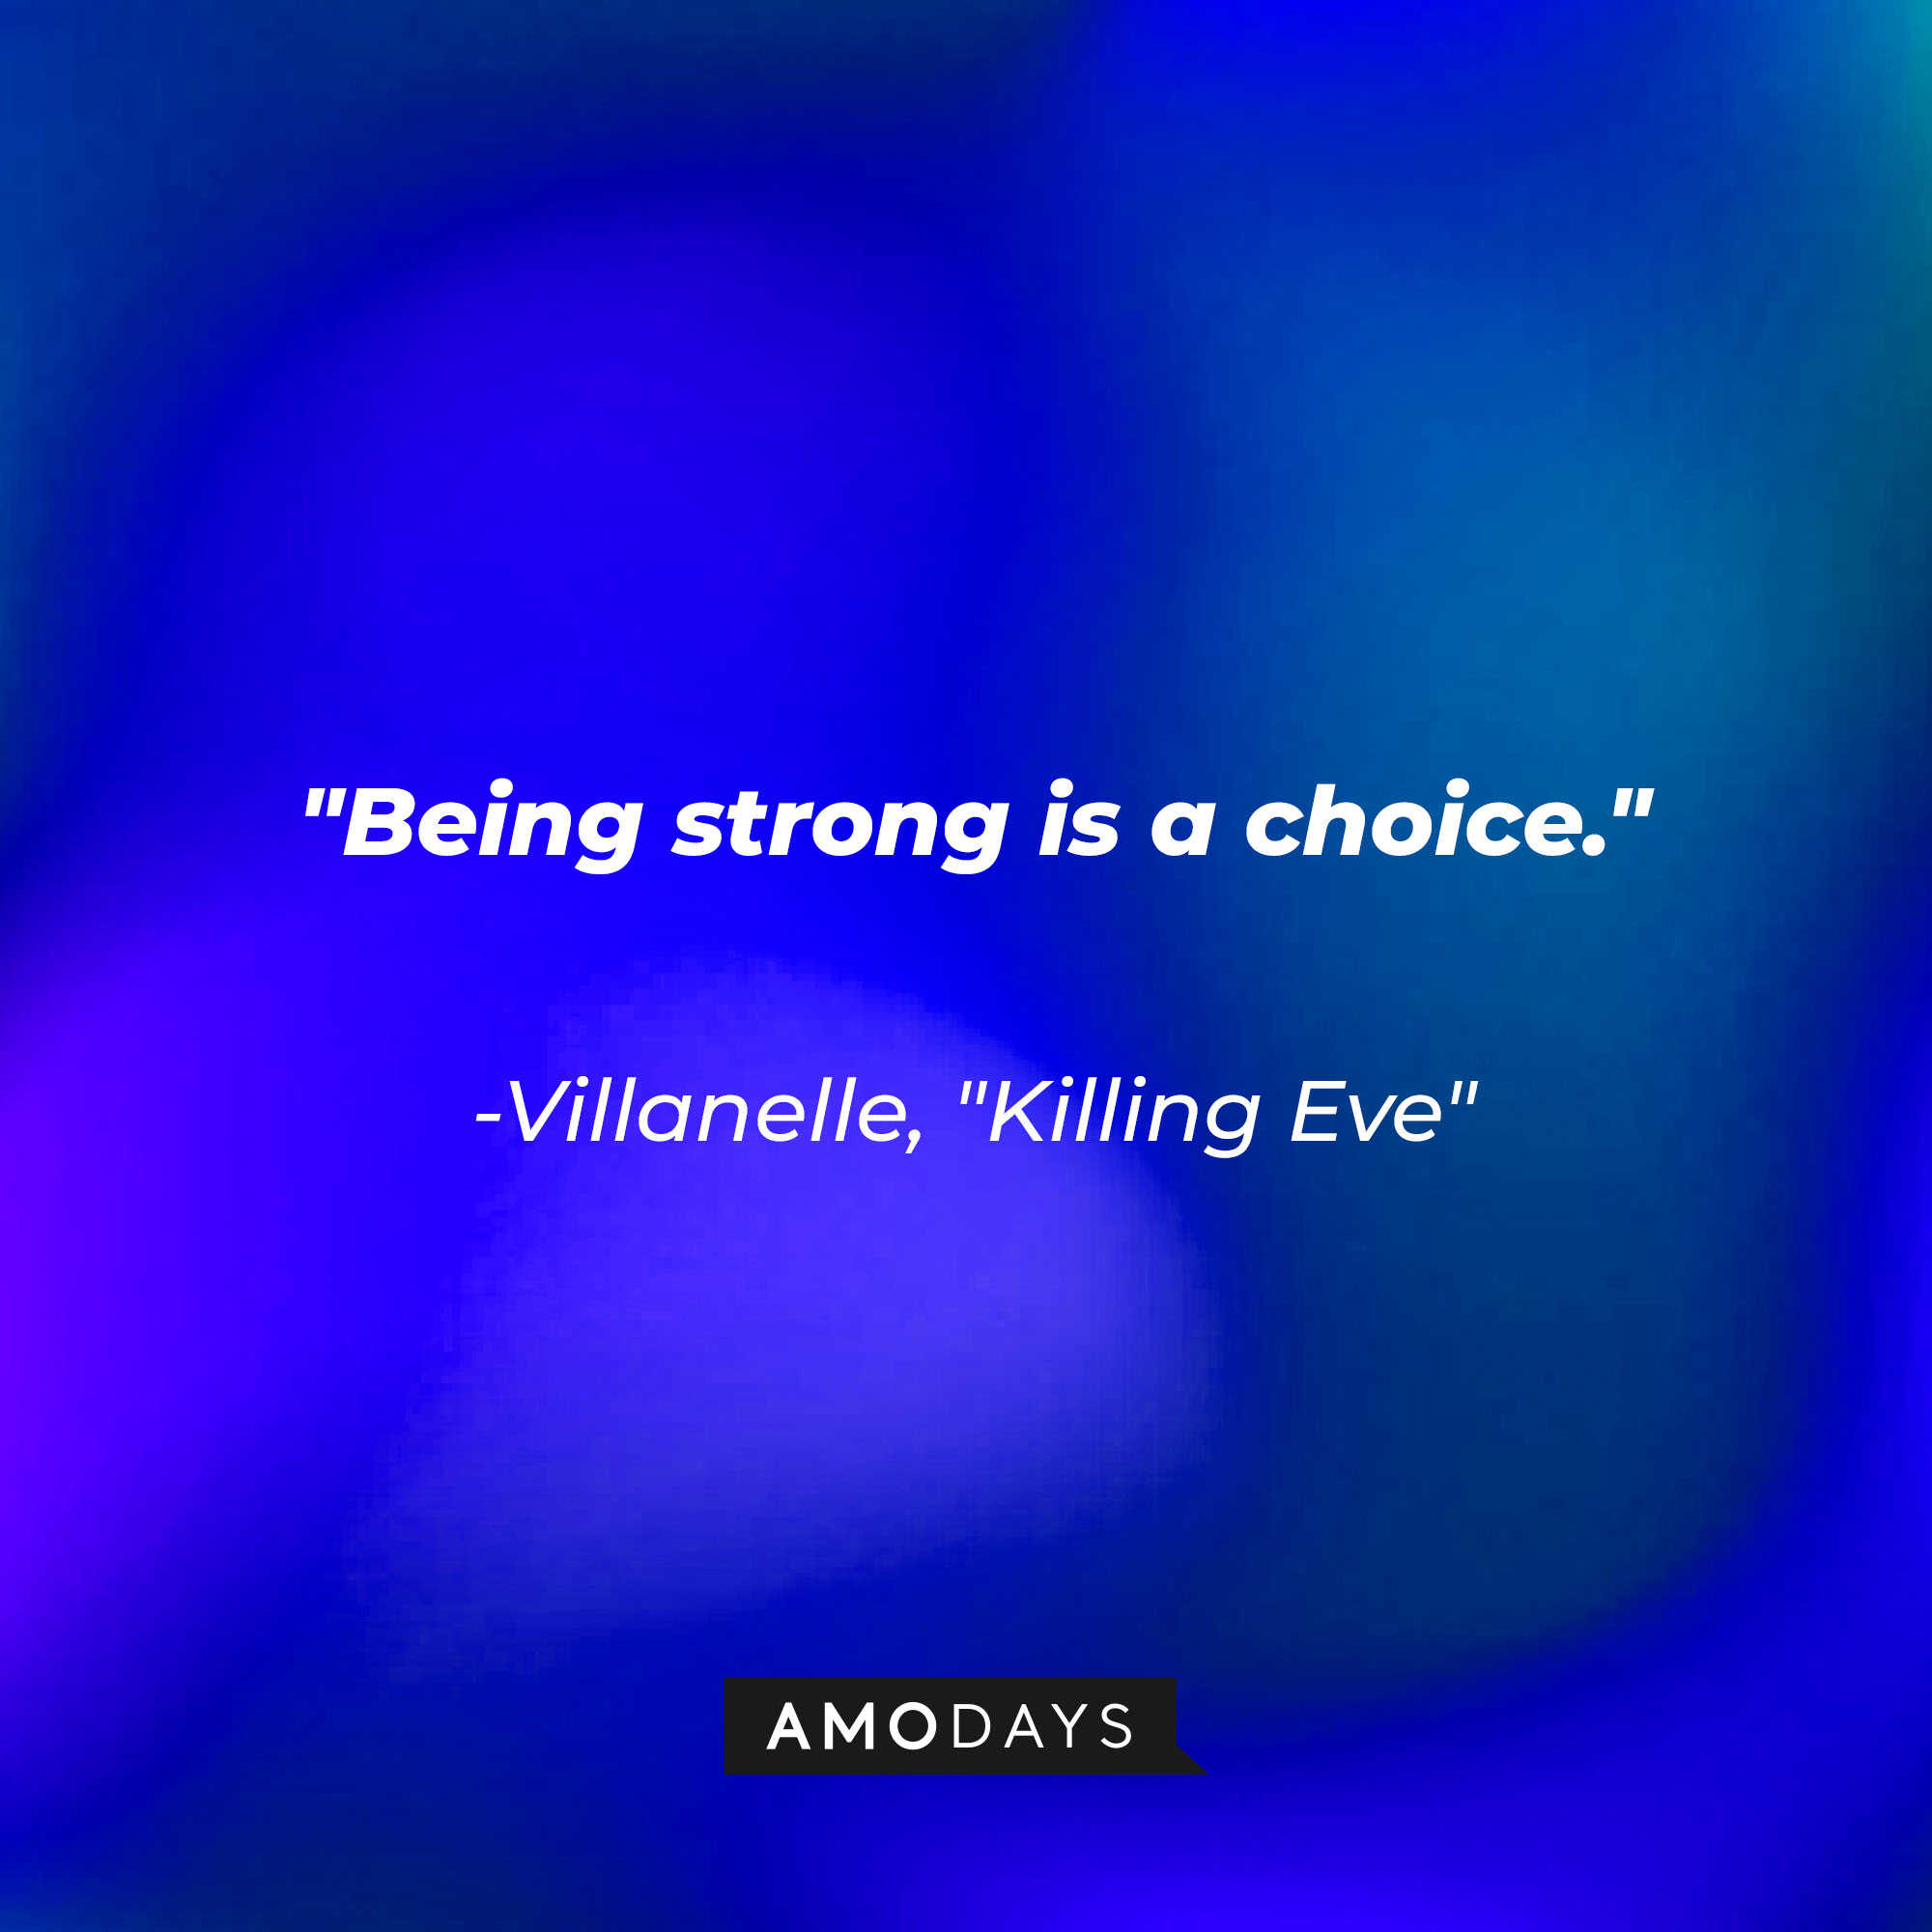 Villanelle's quote: "Being strong is a choice." | Source: Amodays